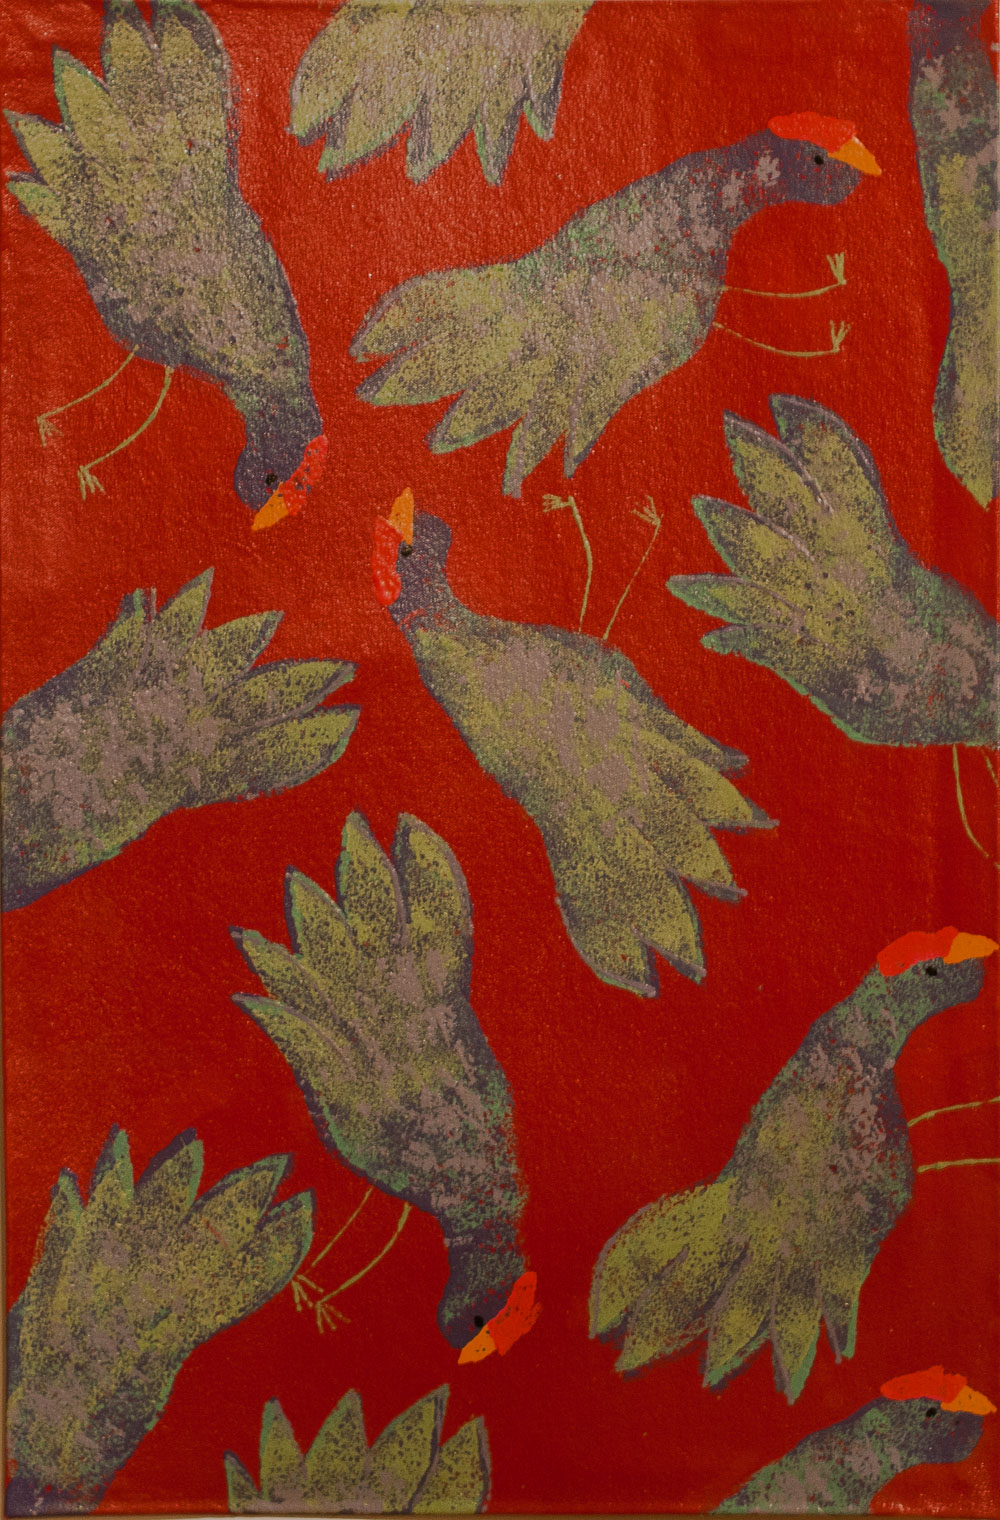 Chickens Scratching on Red